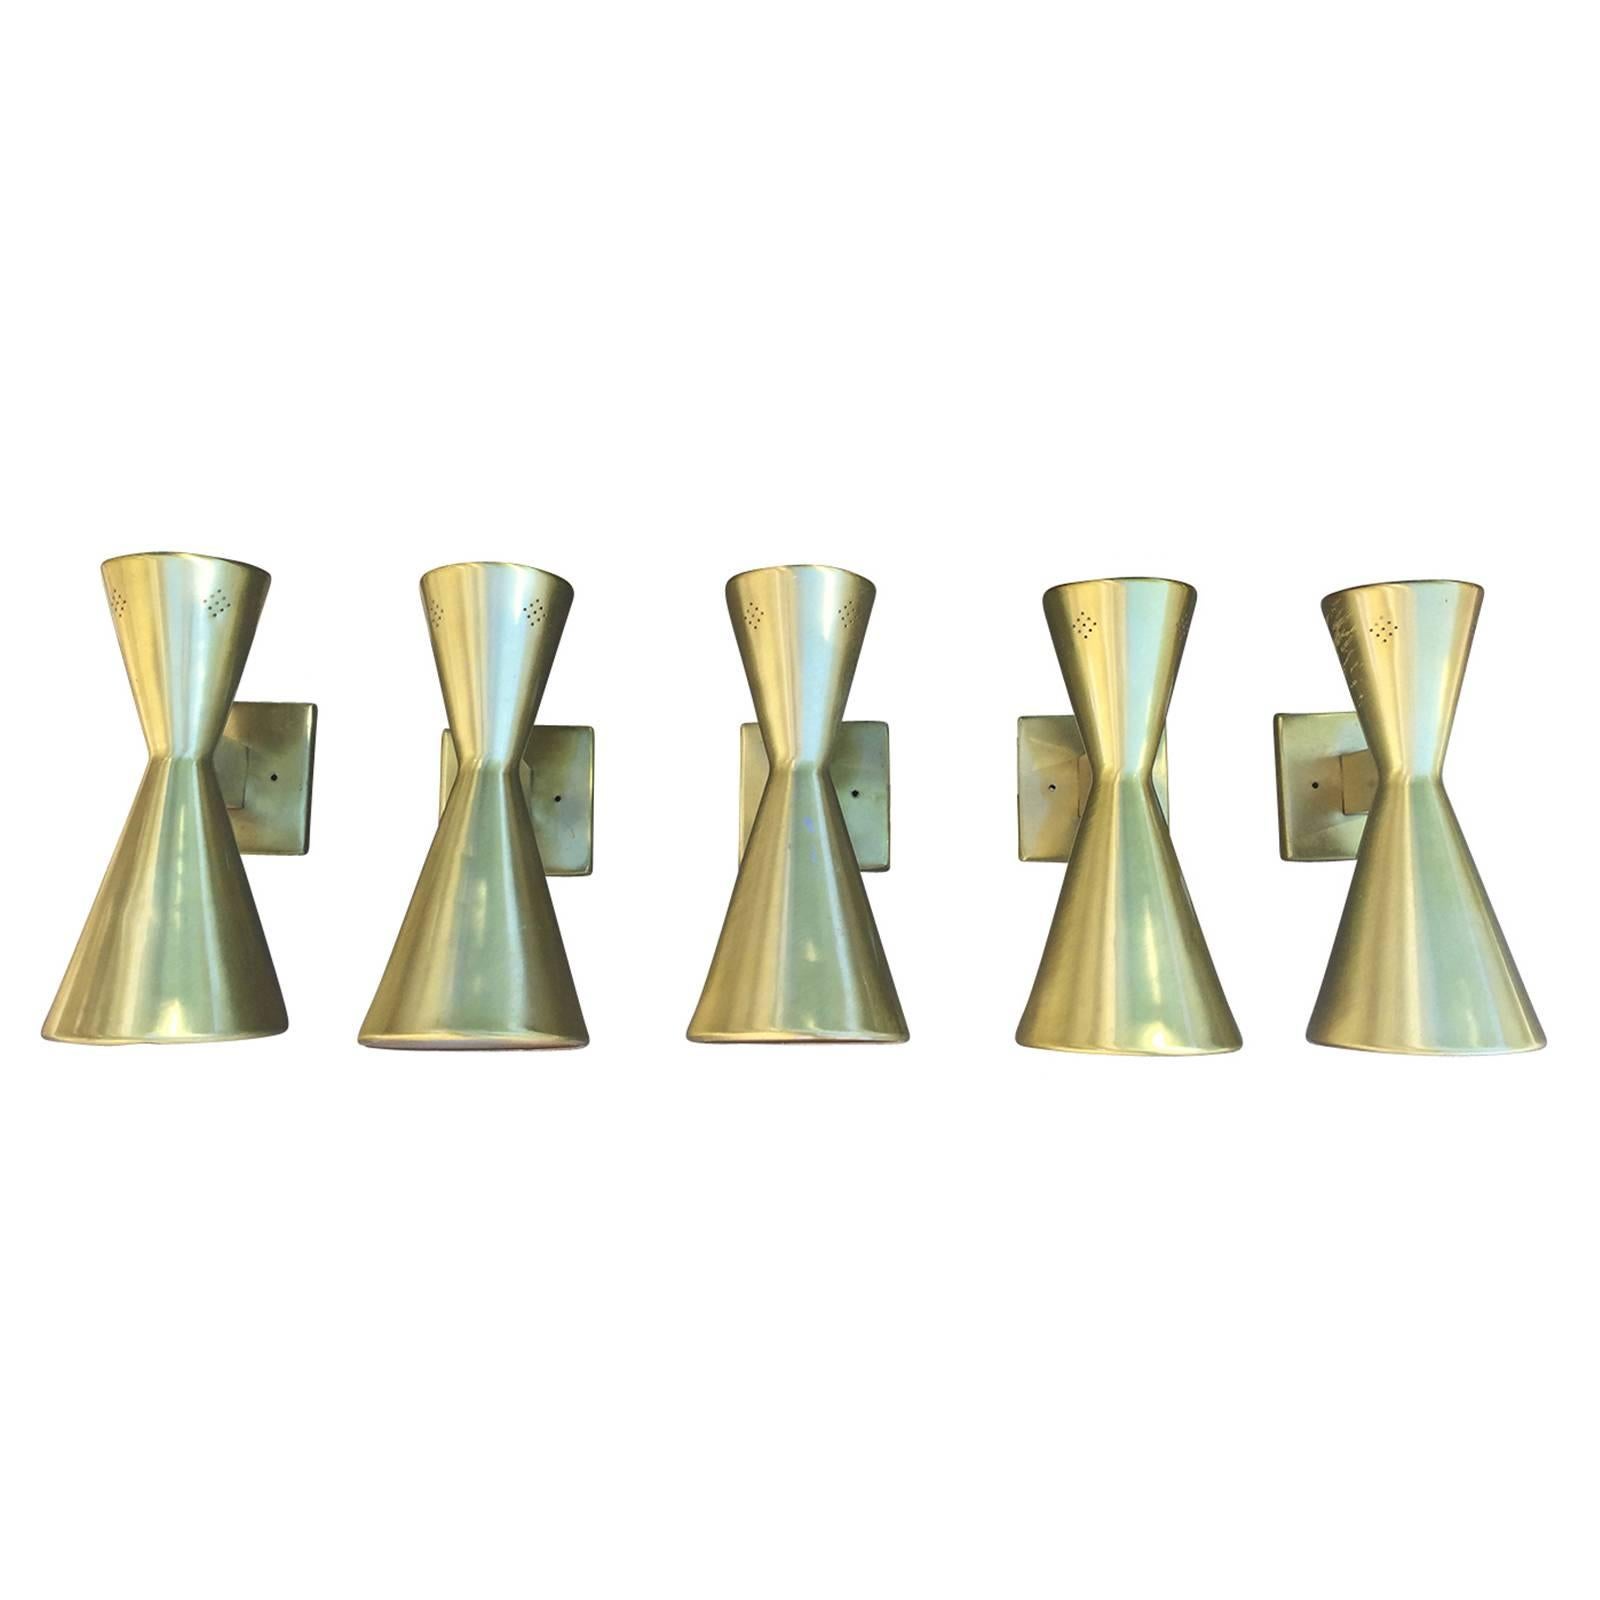 Set of Five Mid-Century, circa 1950s Gold Wall Sconces, Attributed to Lightolier